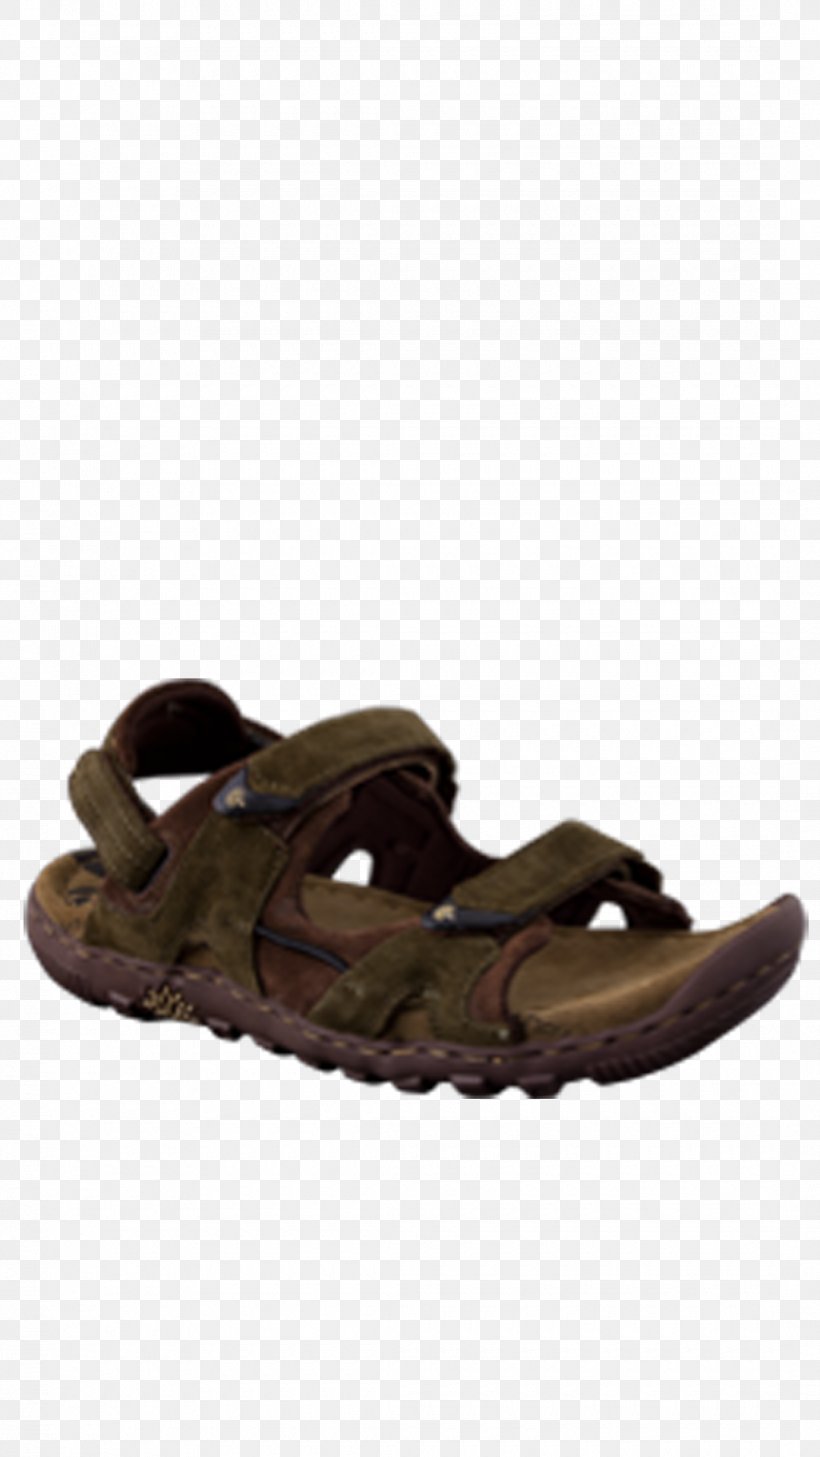 Slipper Sandal Online Shopping Discounts And Allowances Shoe, PNG, 1080x1920px, Slipper, Adidas, Brown, Cashback Website, Casual Download Free